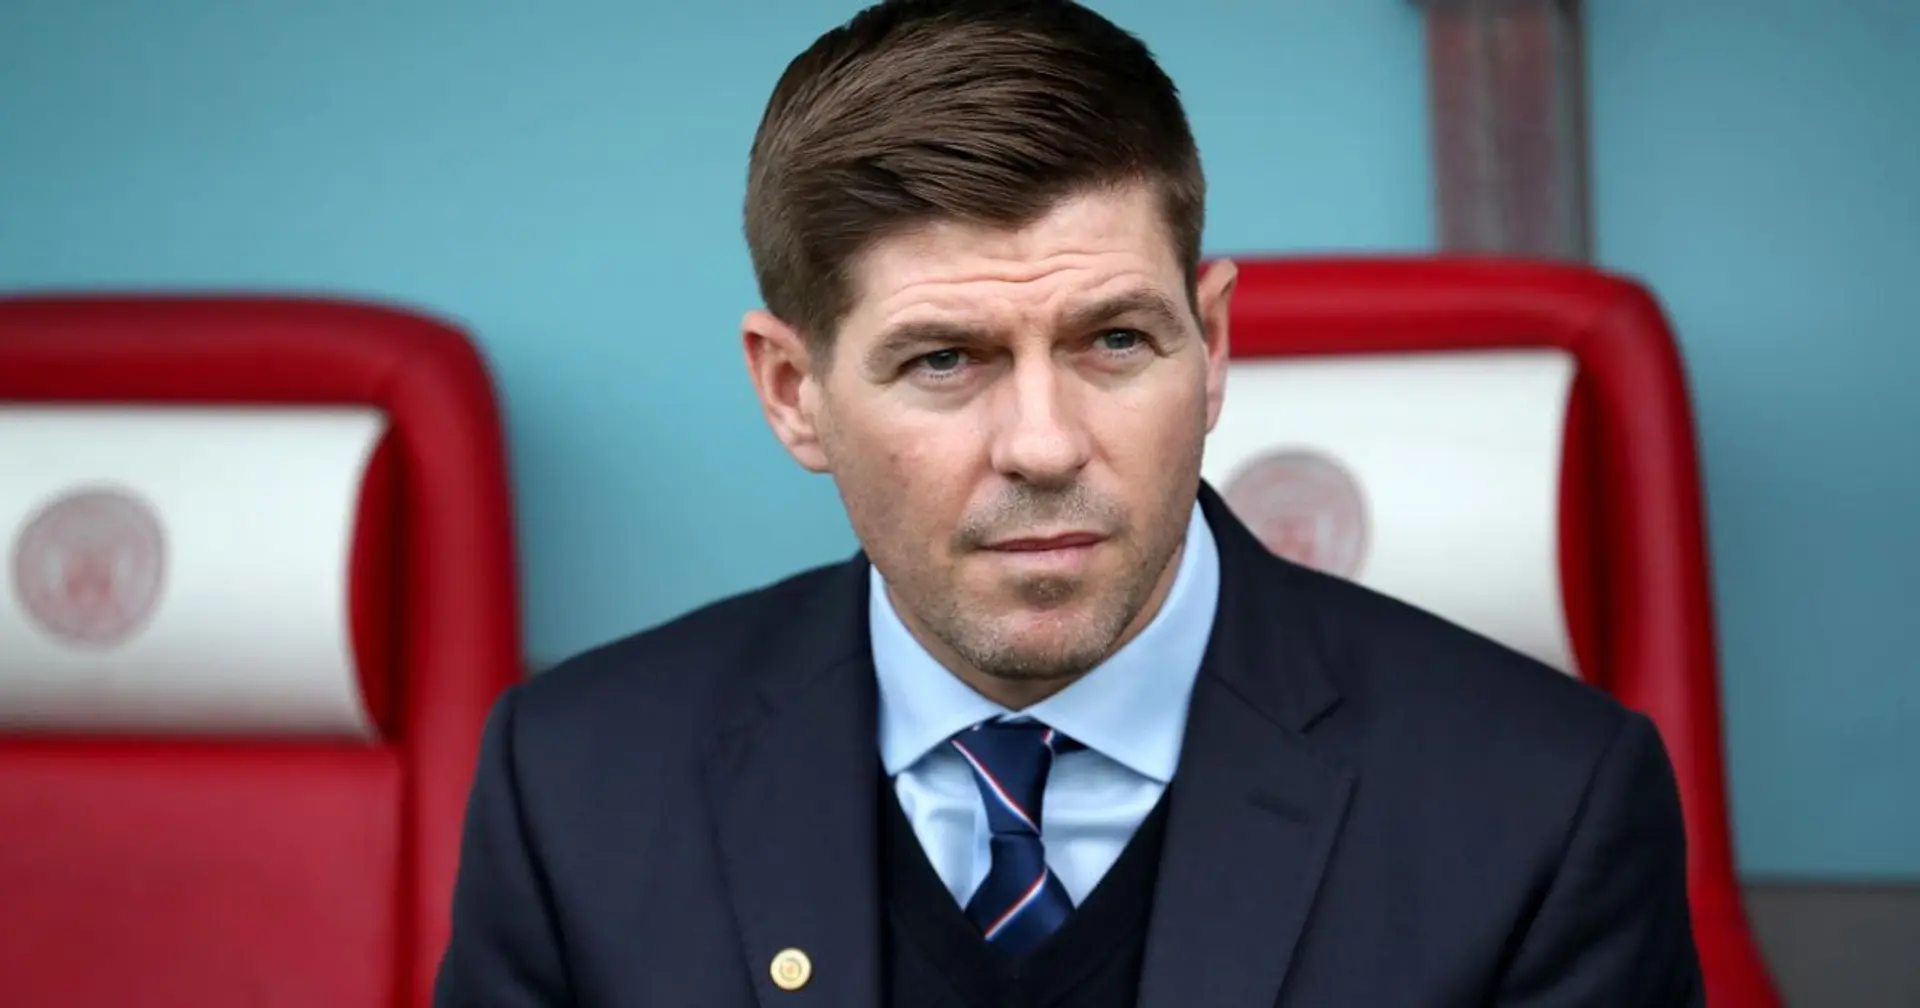 Steven Gerrard's Rangers break 114-year record while staying top of Scottish Premiership